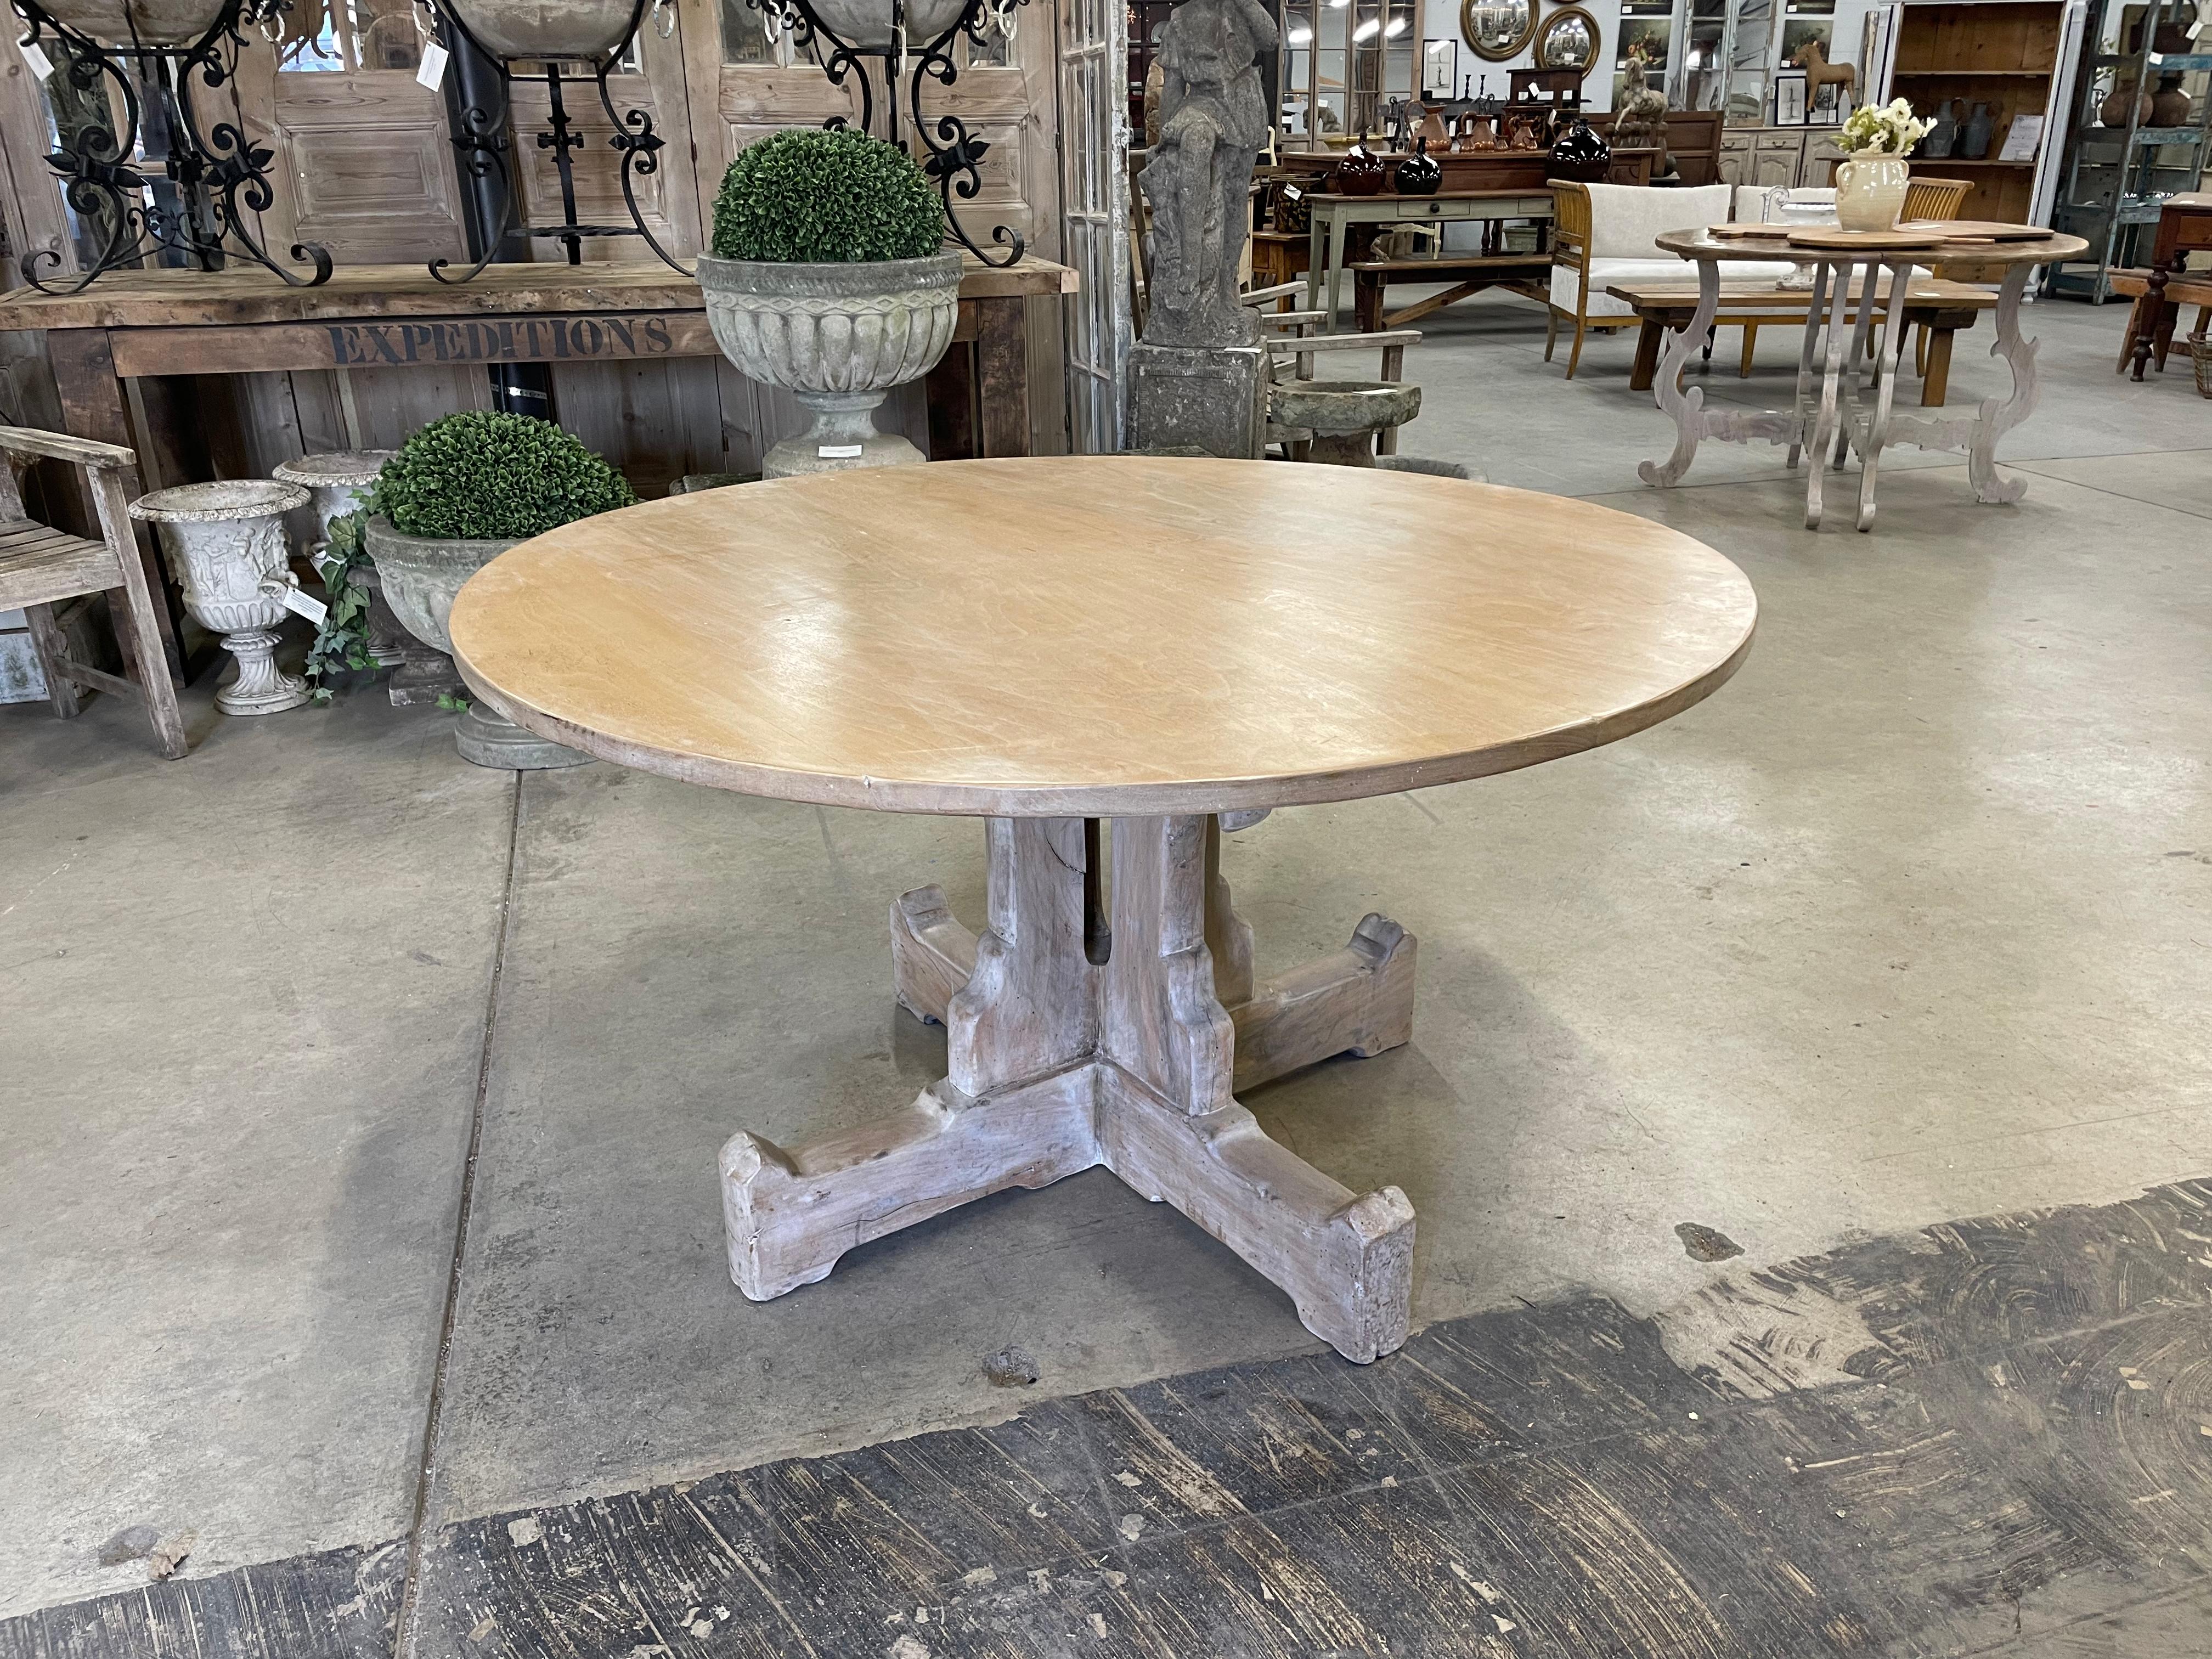 This substantial quality English antique solid walnut round breakfast table is on a carved four baluster base.

This beautiful English Arts &=Crafts table has a polished and a lime-wash finish pedestal base.

